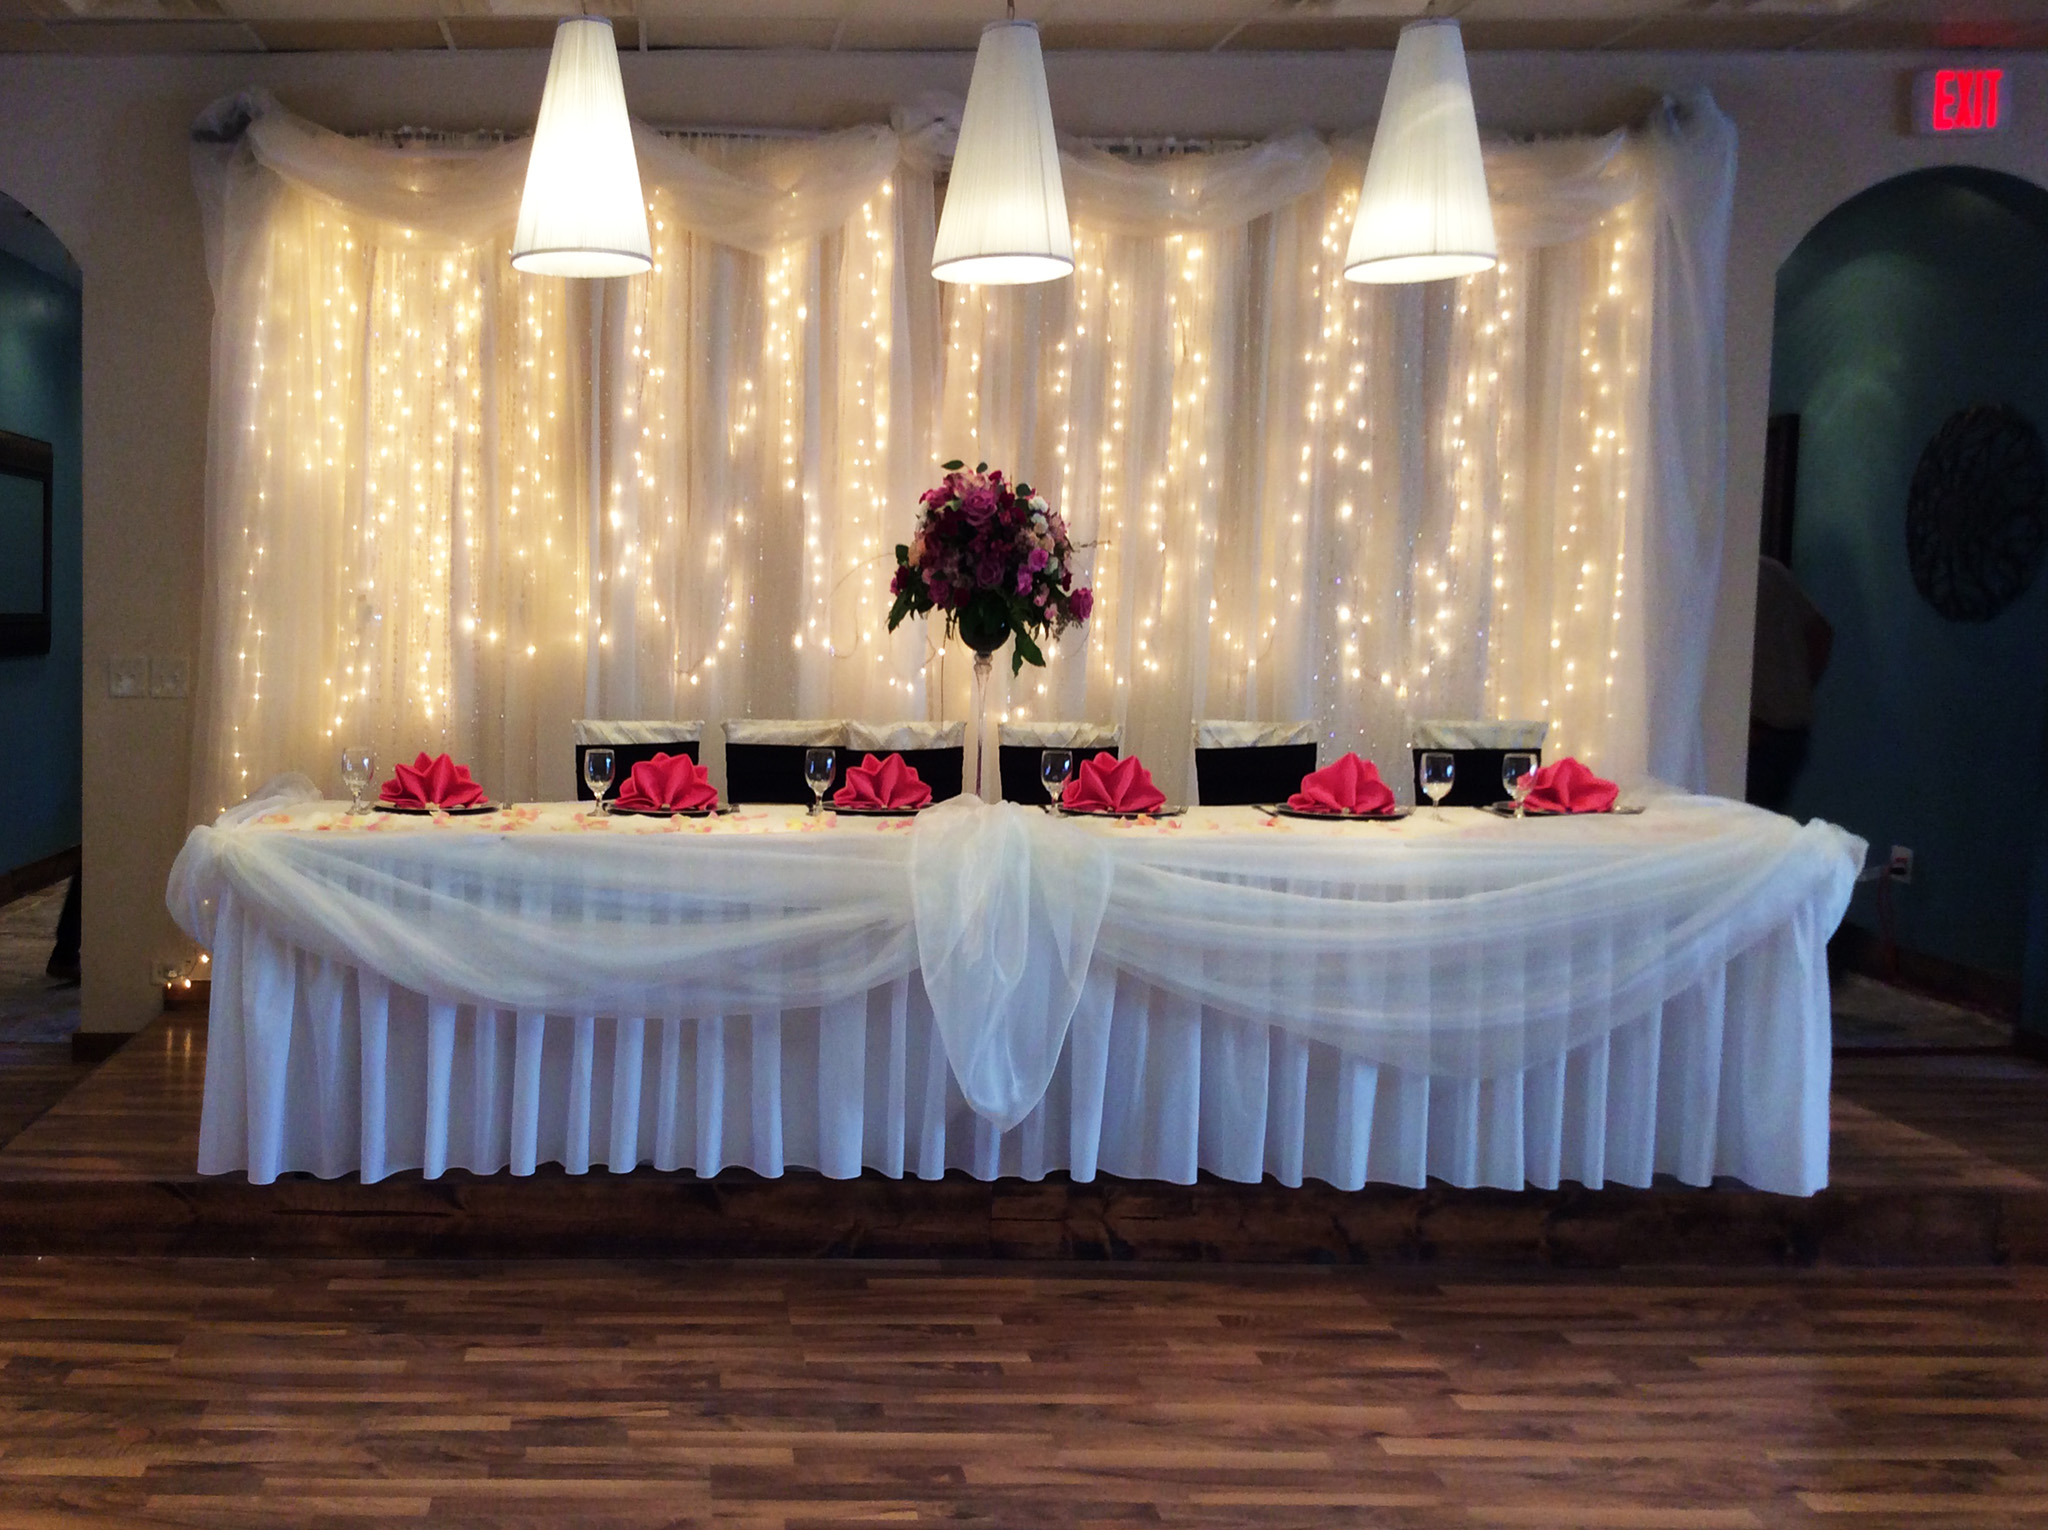 Nicely decorated wall and table